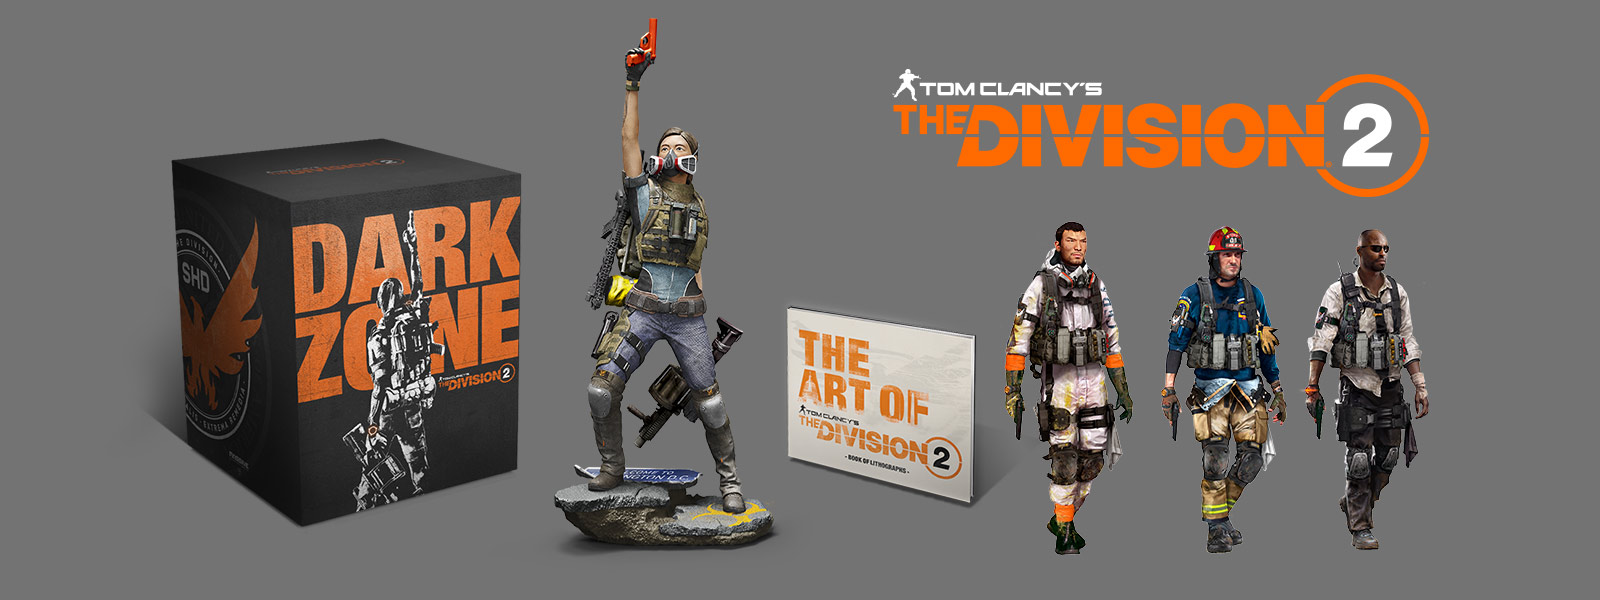 tom clancy's the division 2 microsoft store